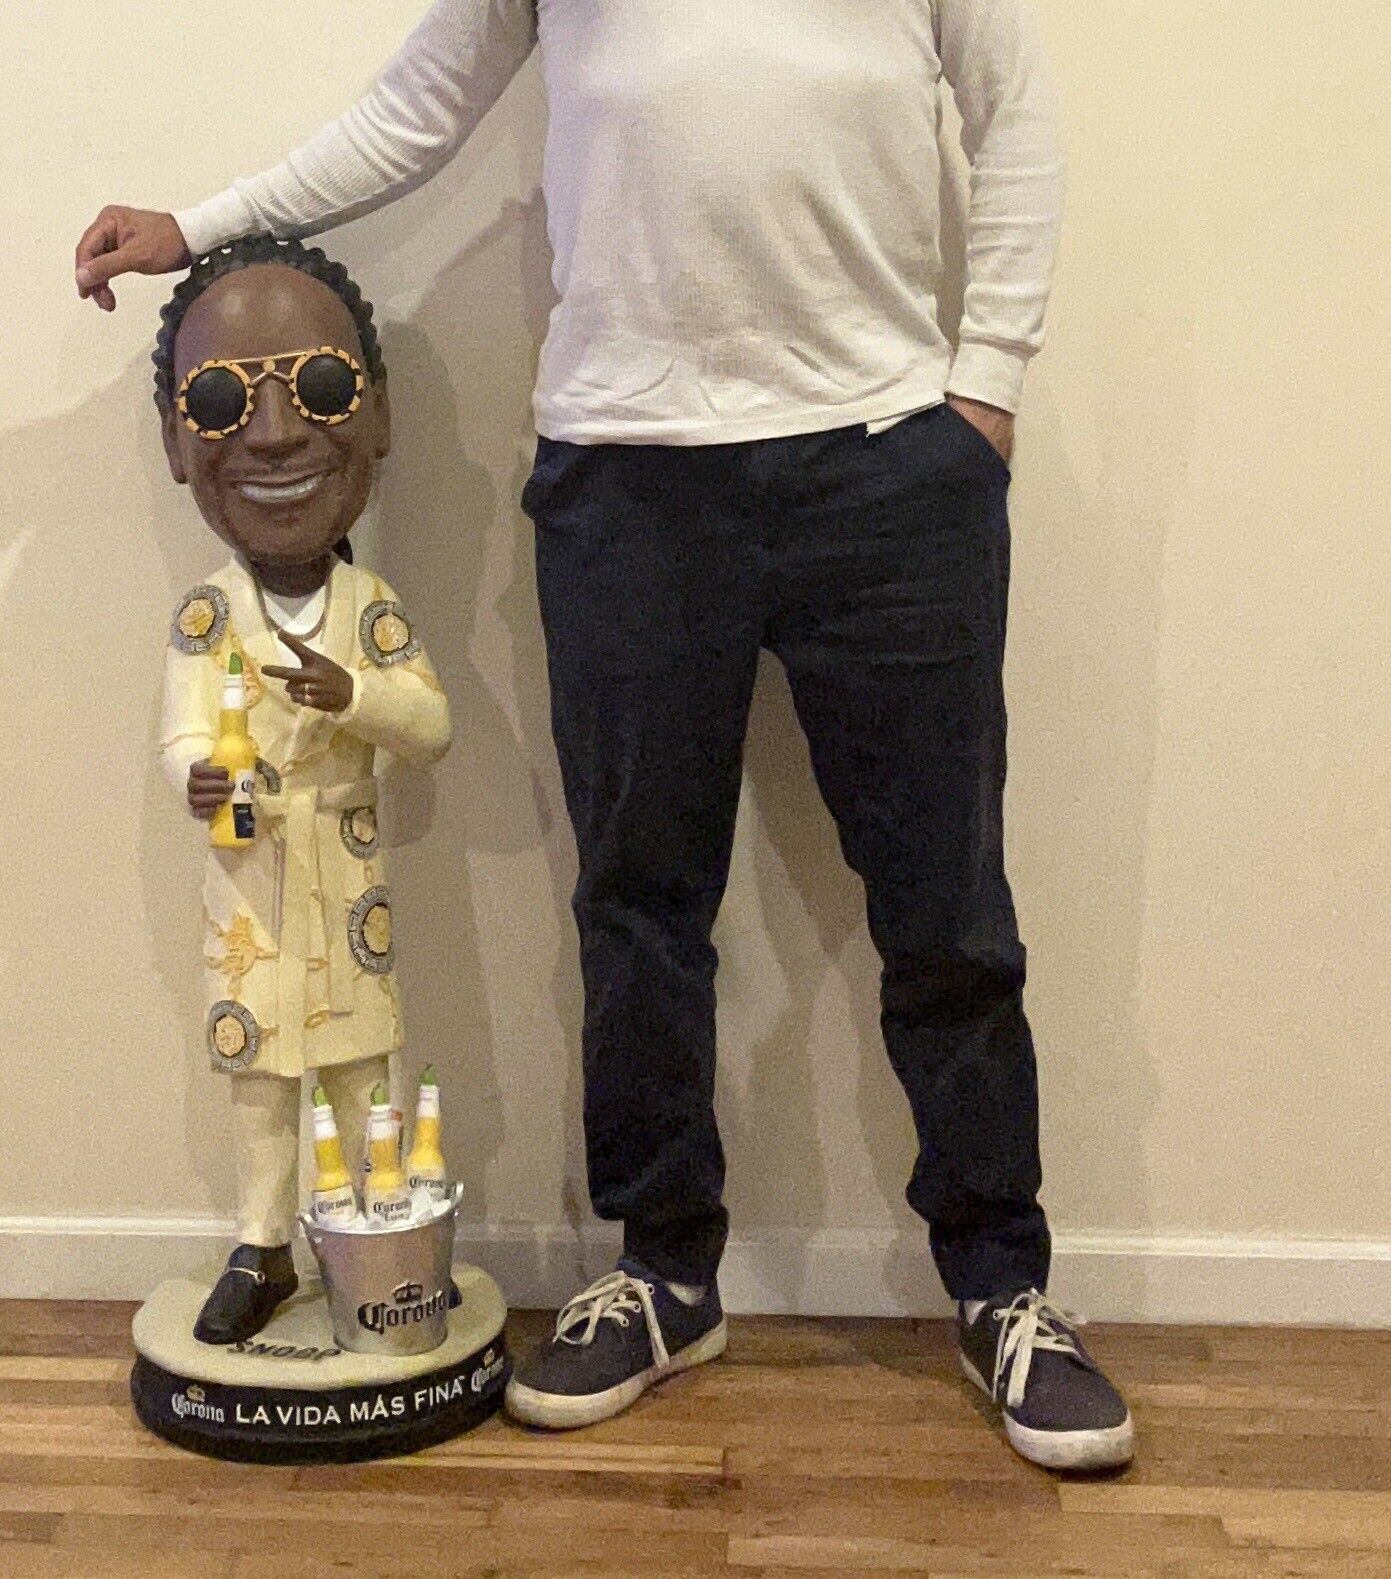 snoop dogg bobblehead 43 Inch Perfect Decoration, Perfect For A Man Cave